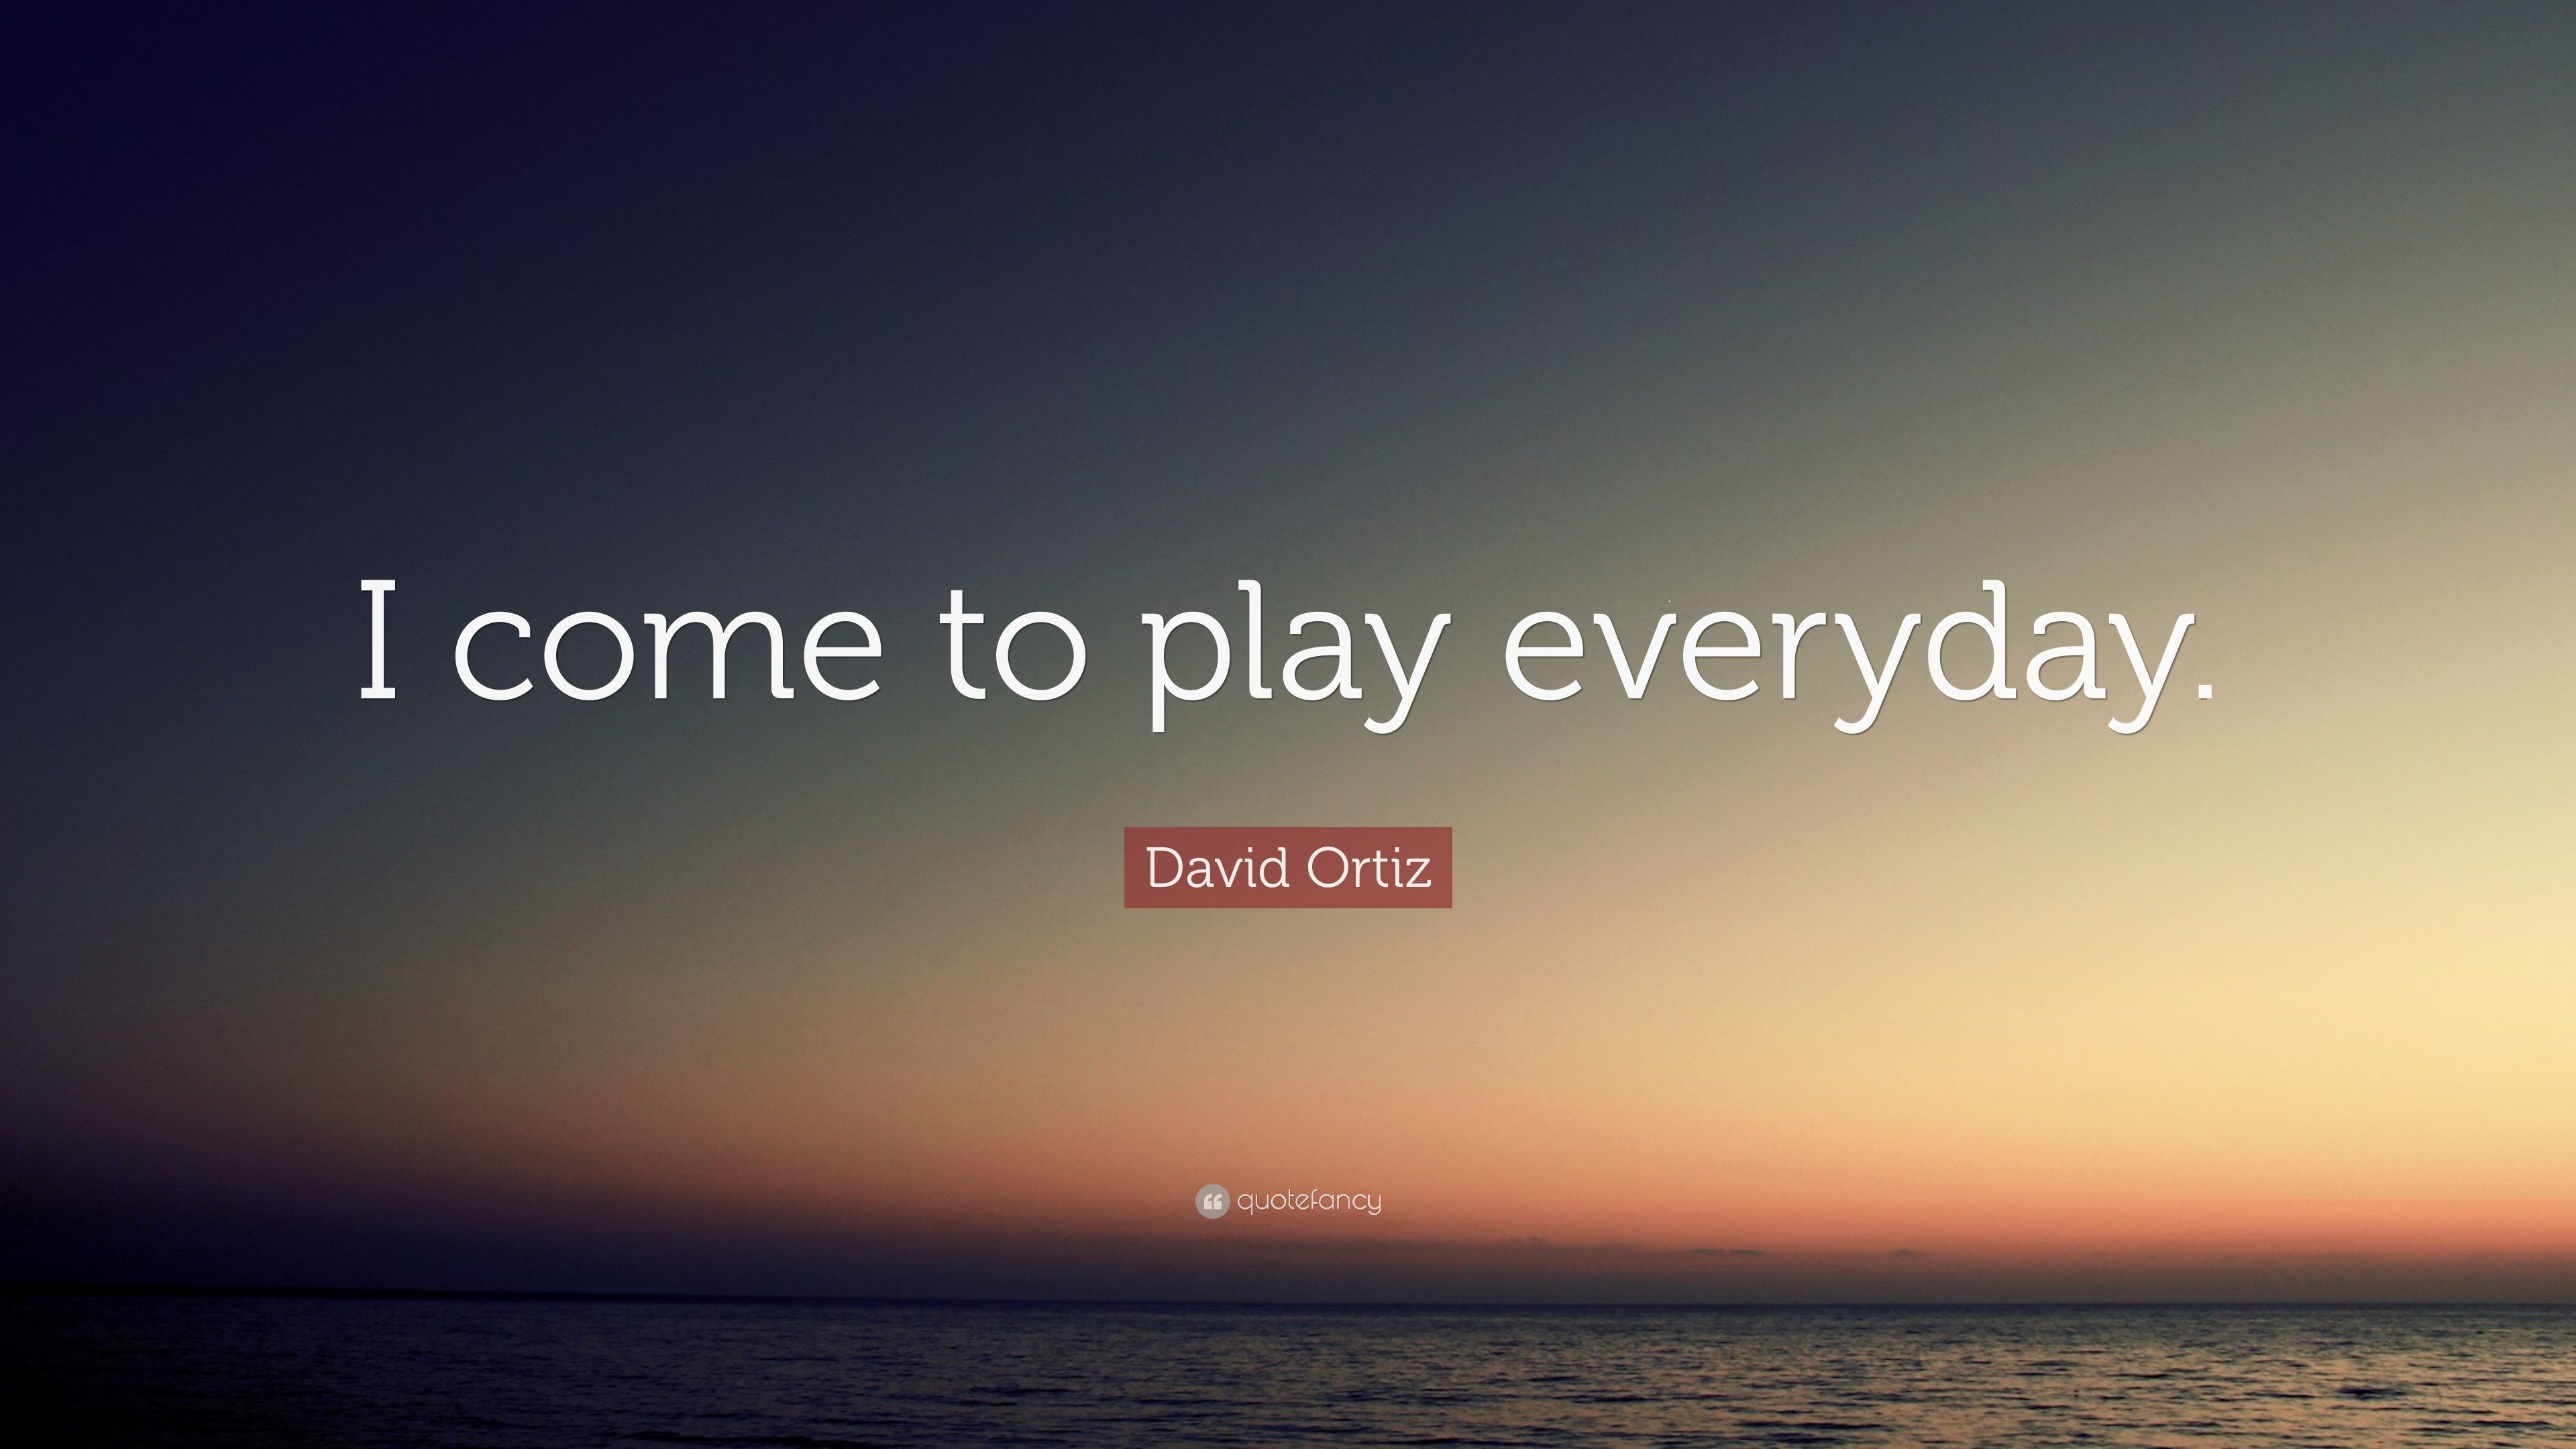 3840x2160 David Ortiz Quote: “I come to play everyday.”